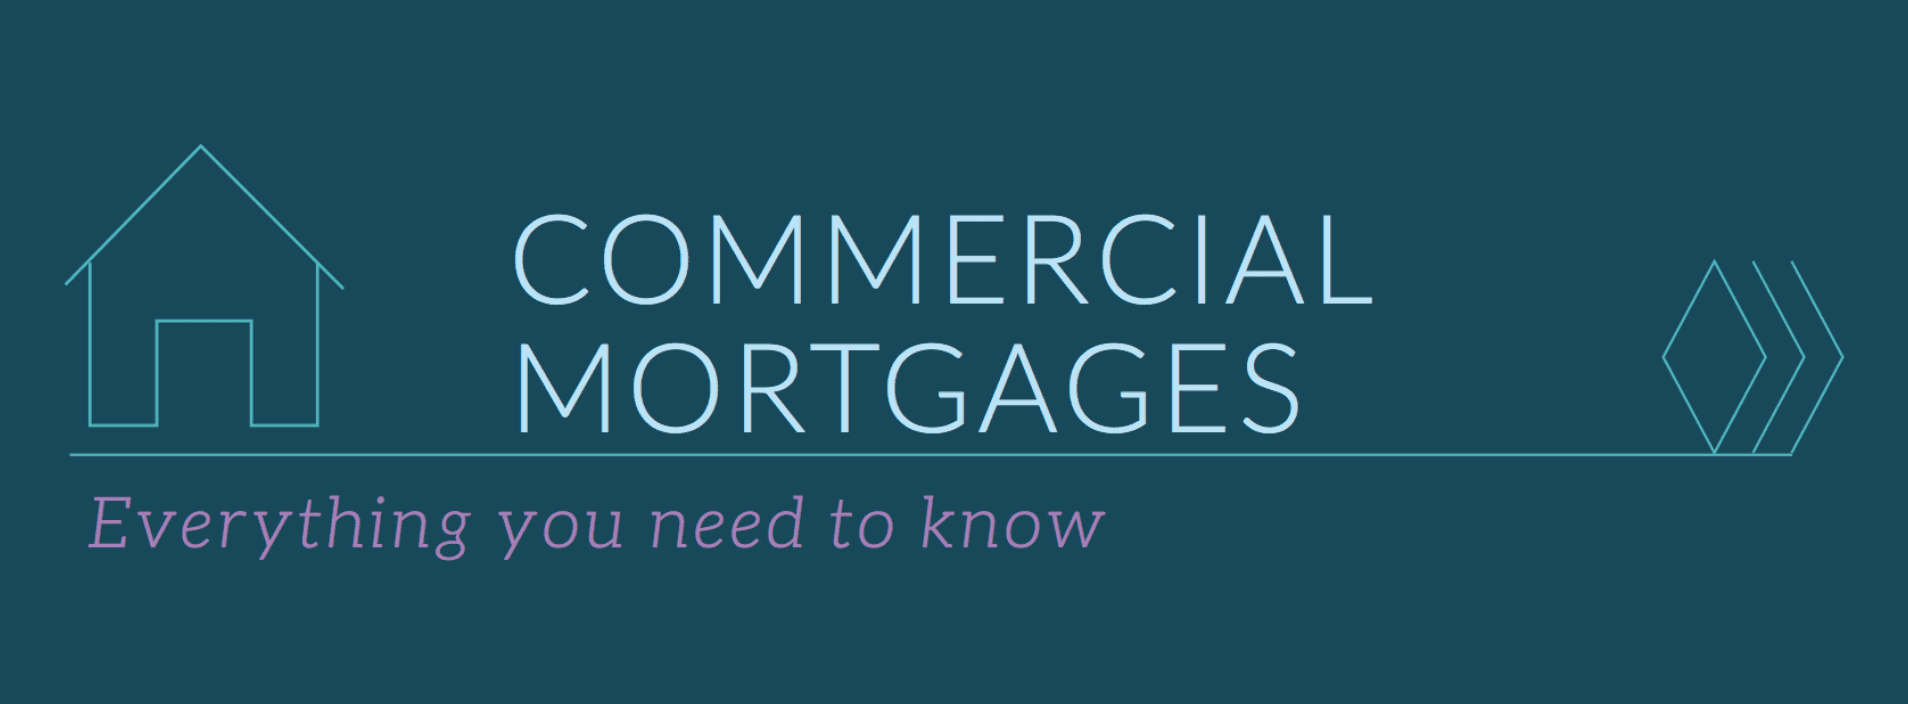 Infographic: Commercial Mortgages